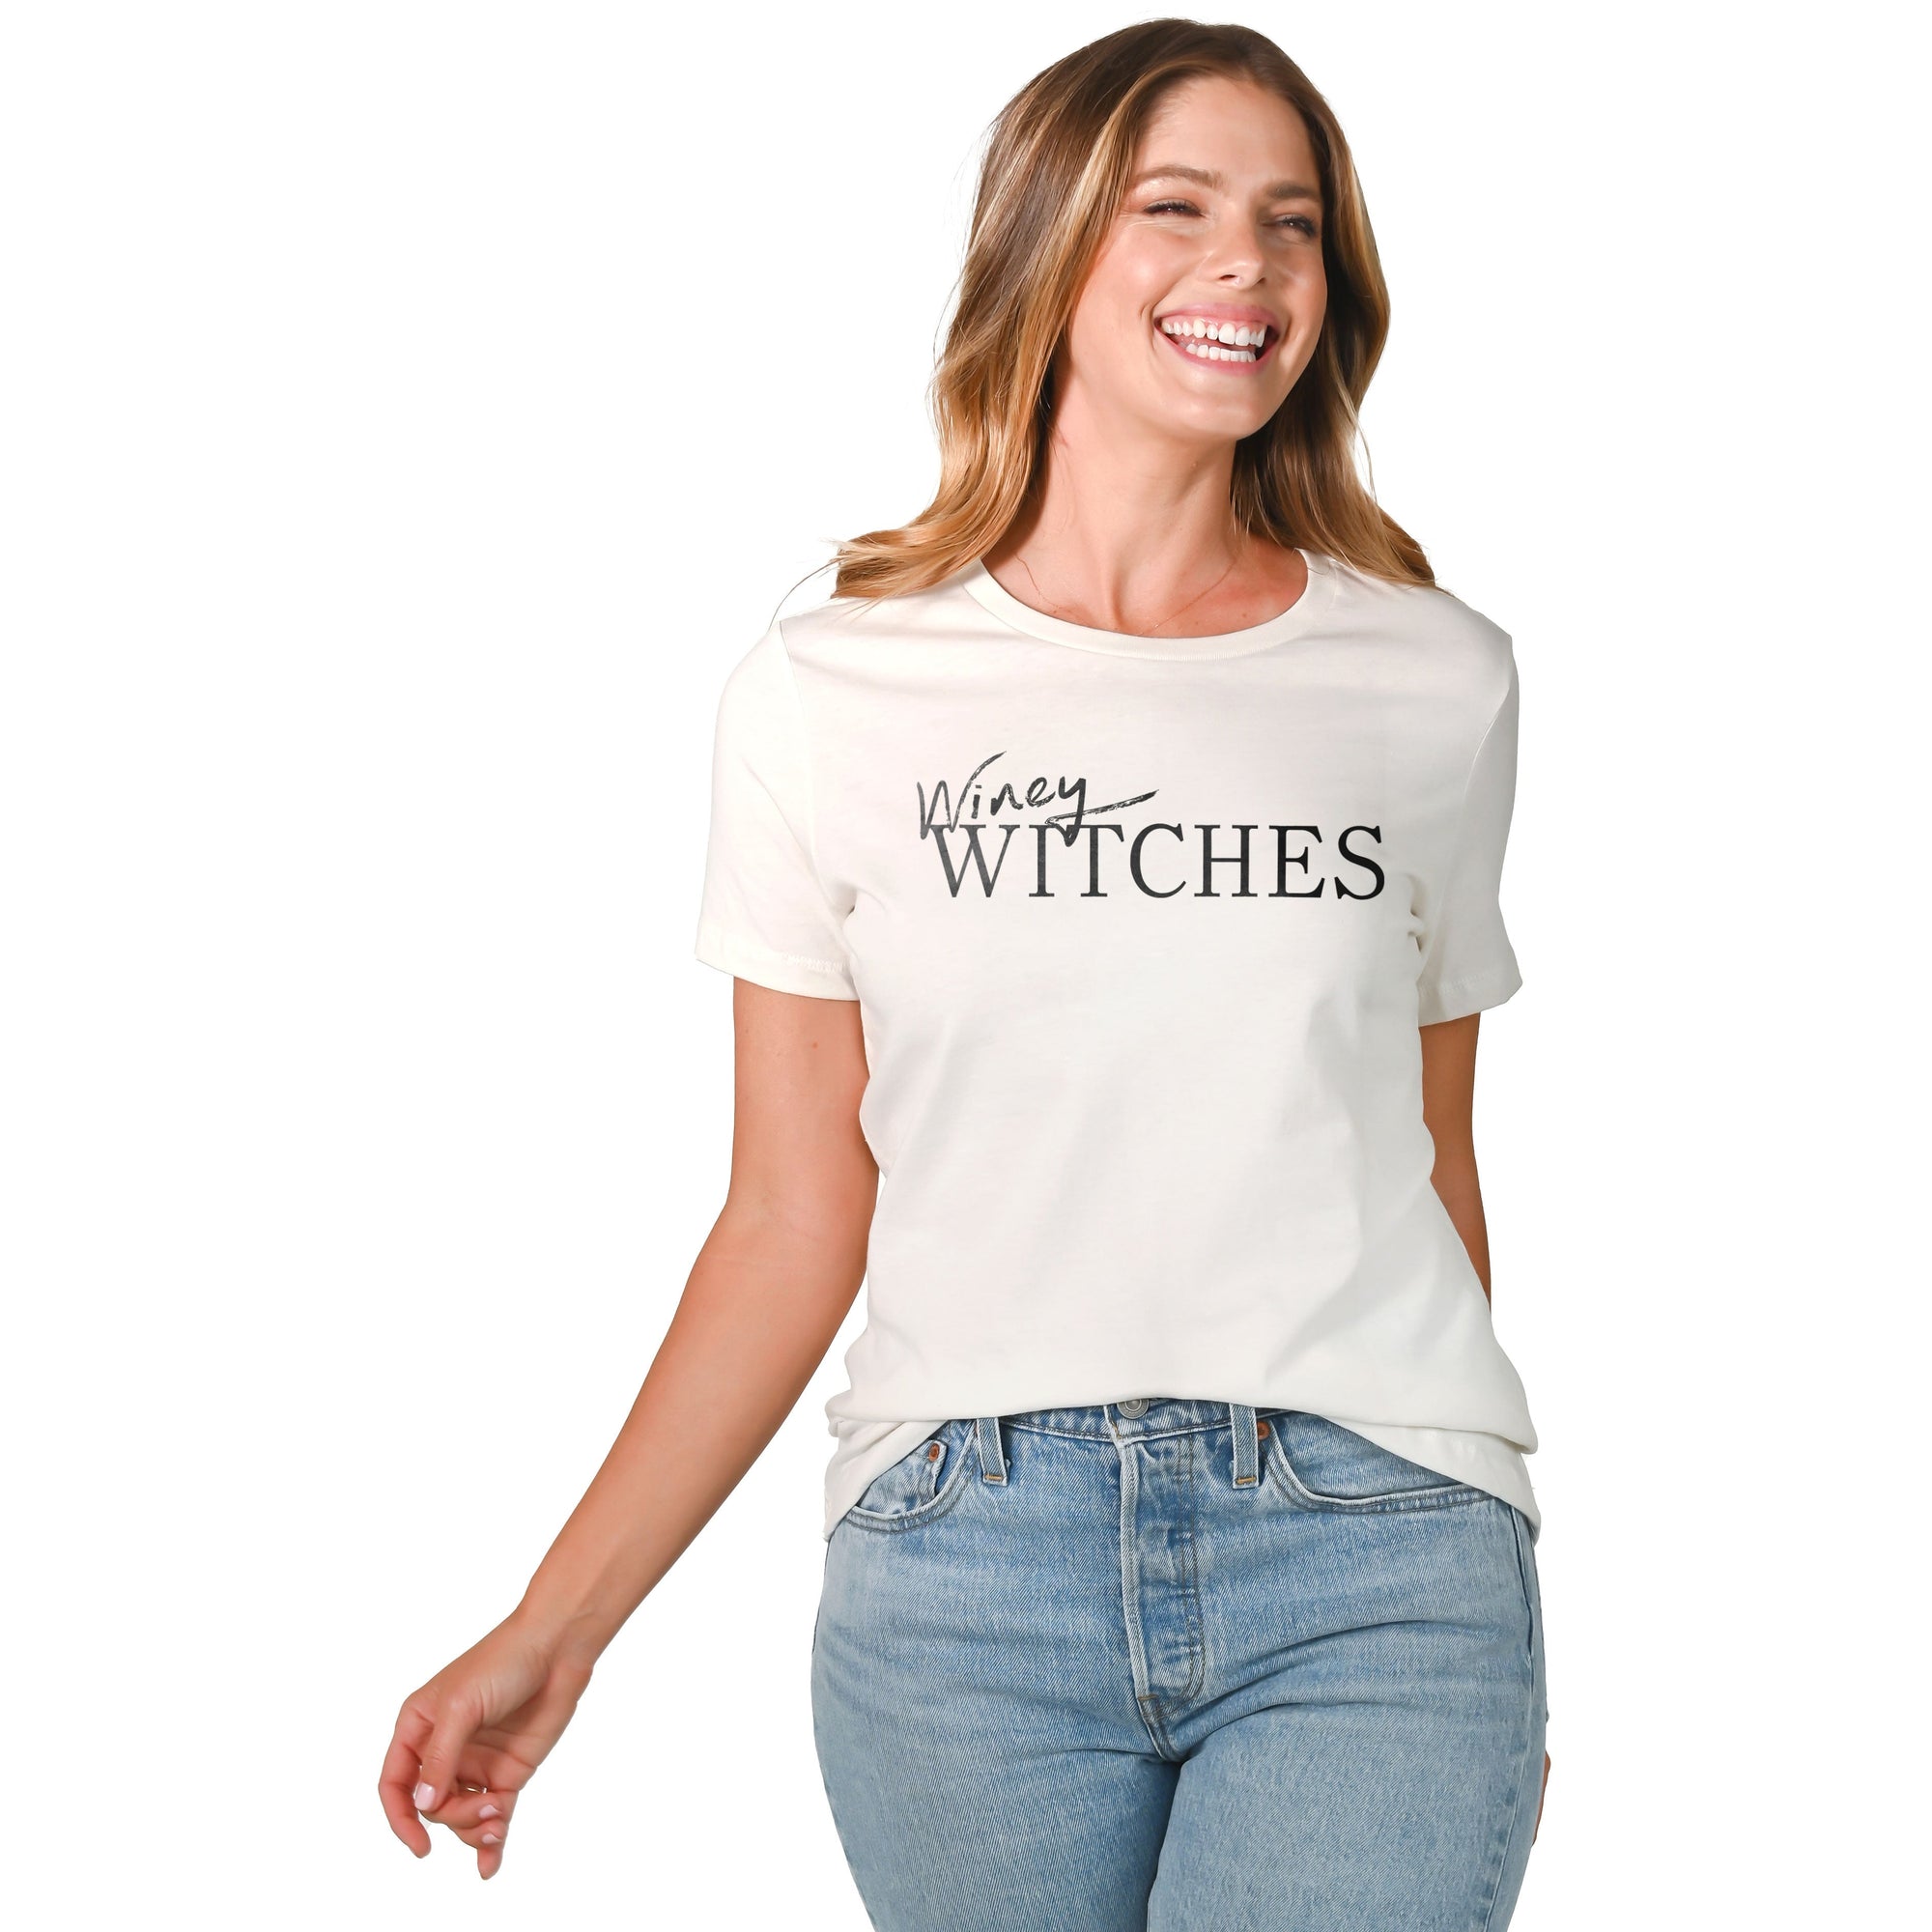 Winey Witches - Stories You Can Wear